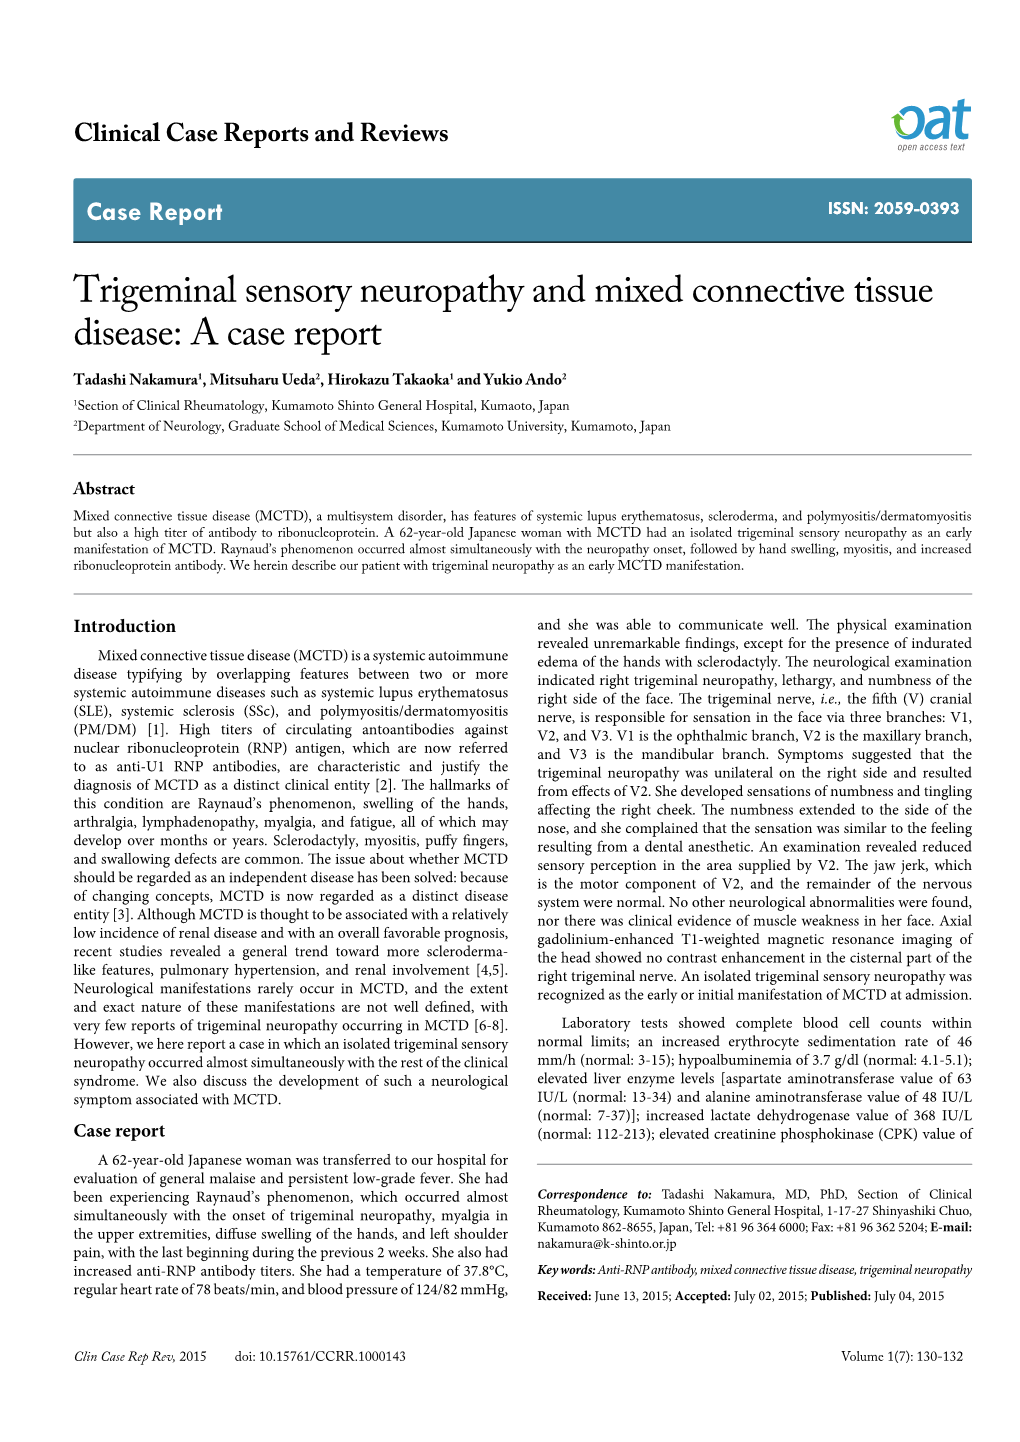 Trigeminal Sensory Neuropathy and Mixed Connective Tissue Disease